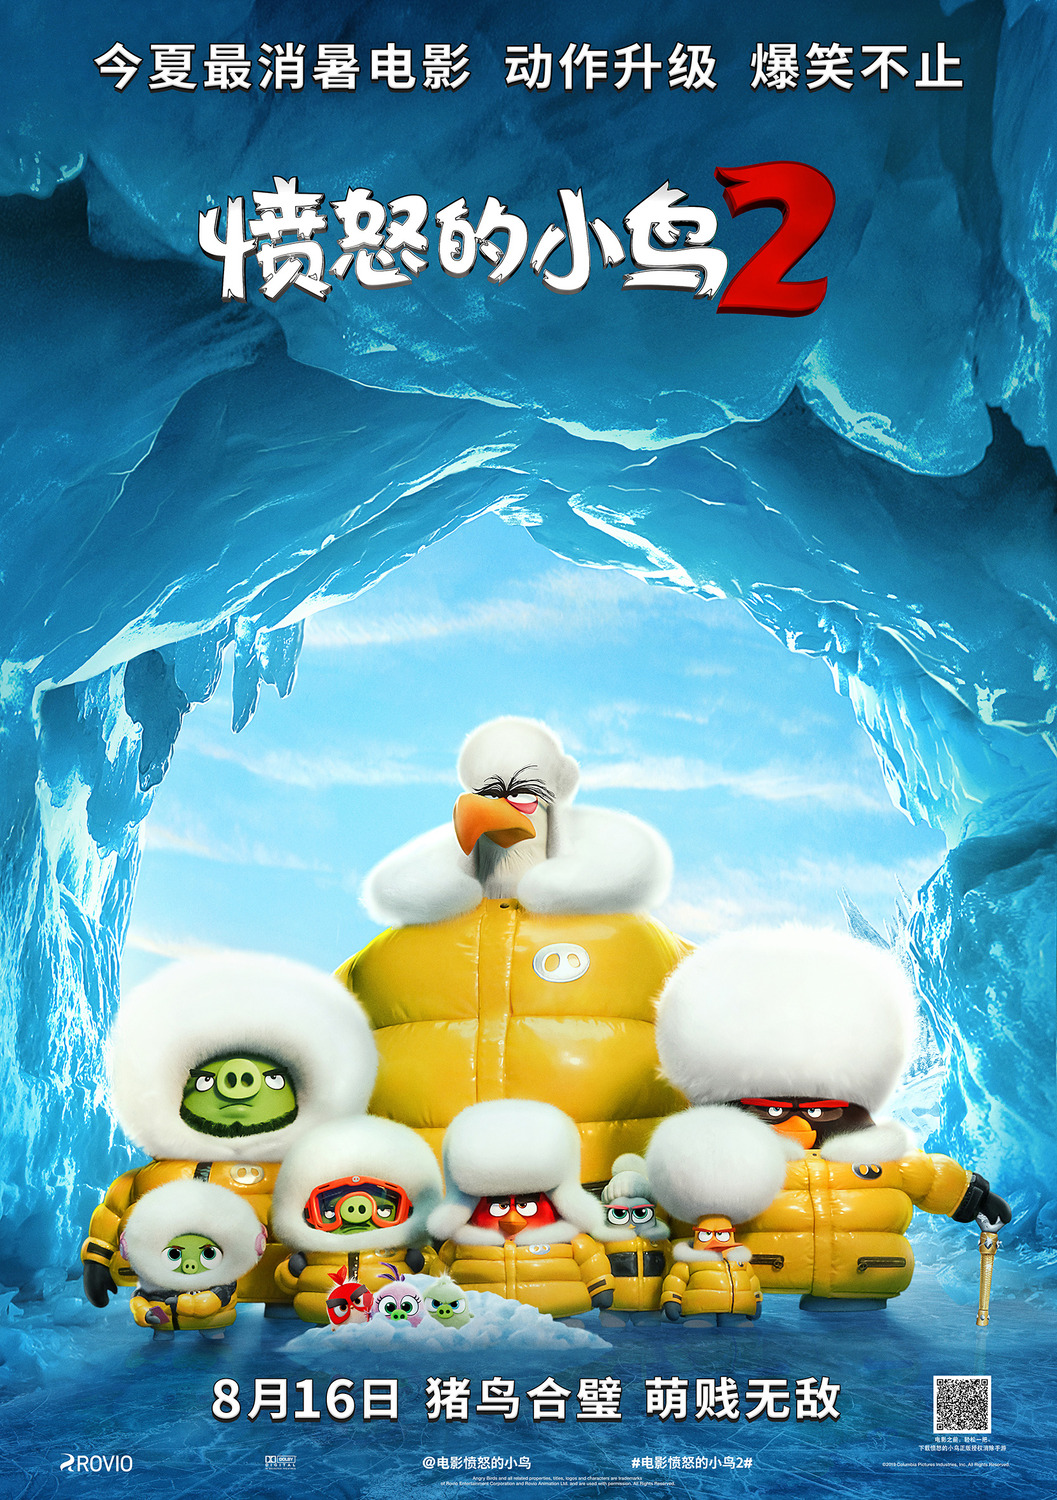 Extra Large Movie Poster Image for The Angry Birds Movie 2 (#13 of 18)